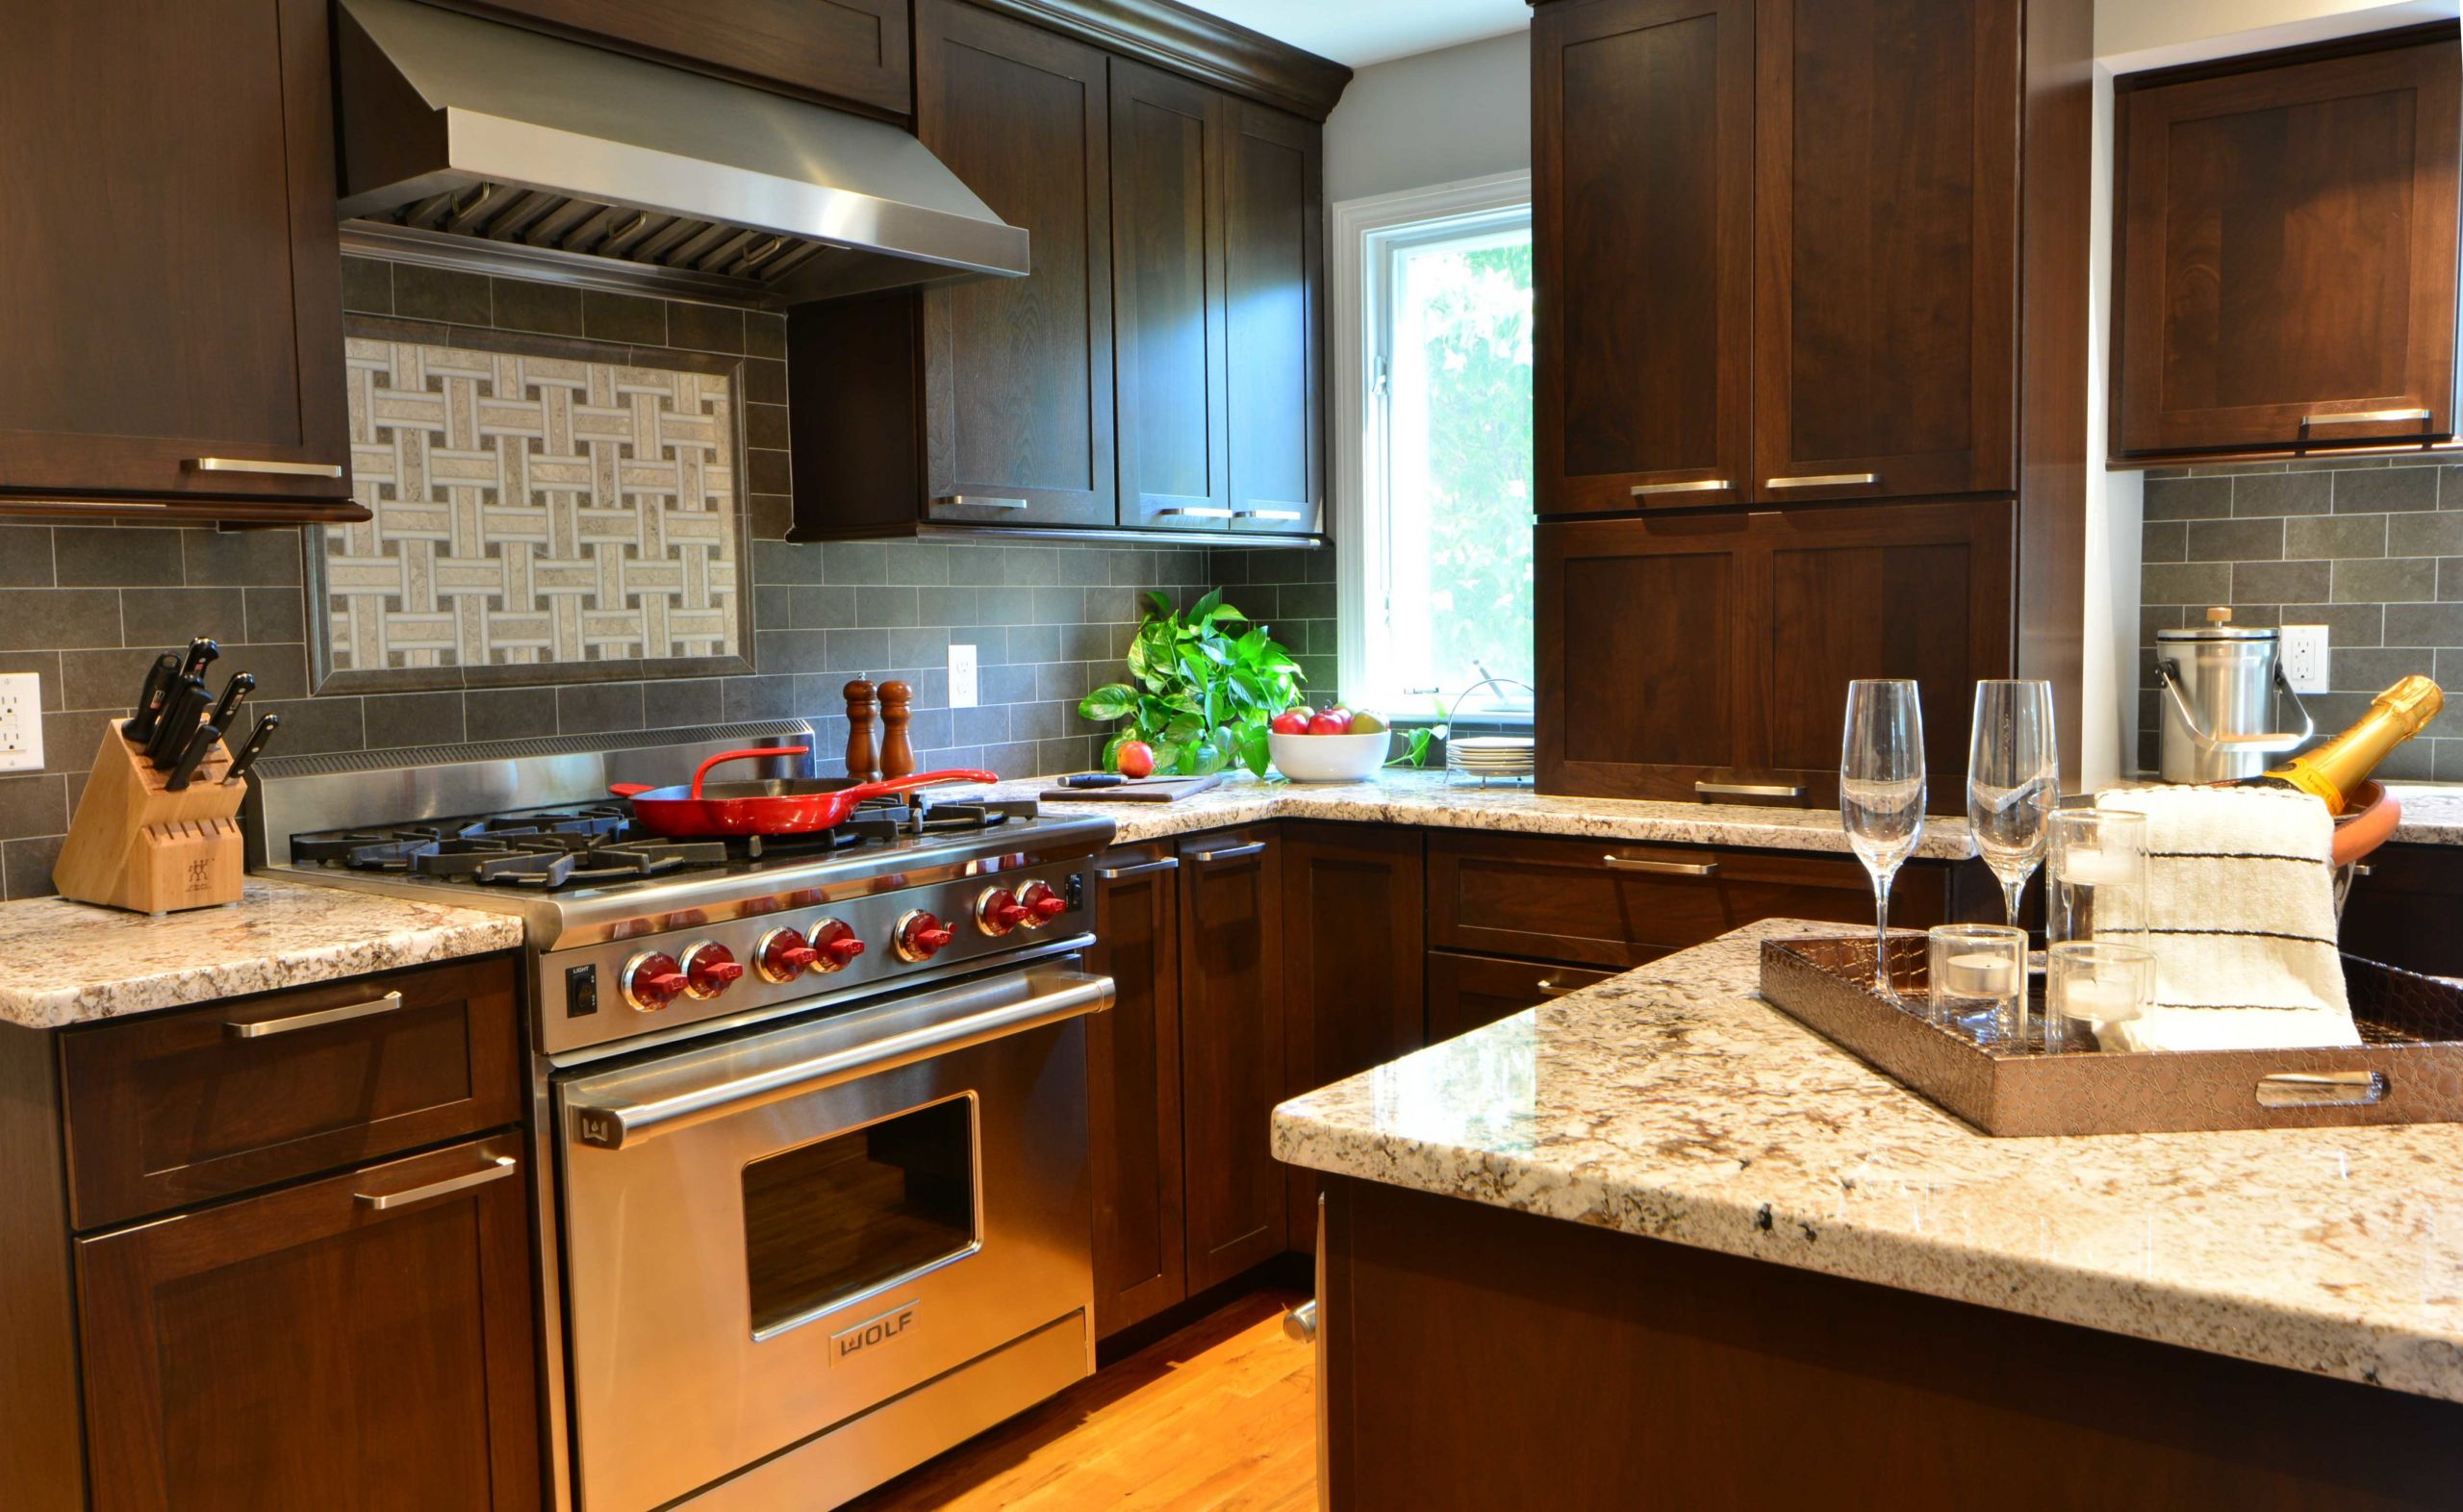 Kitchen Remodeling Costs
 Kitchen Kitchen Project With Small Kitchen Remodel Cost